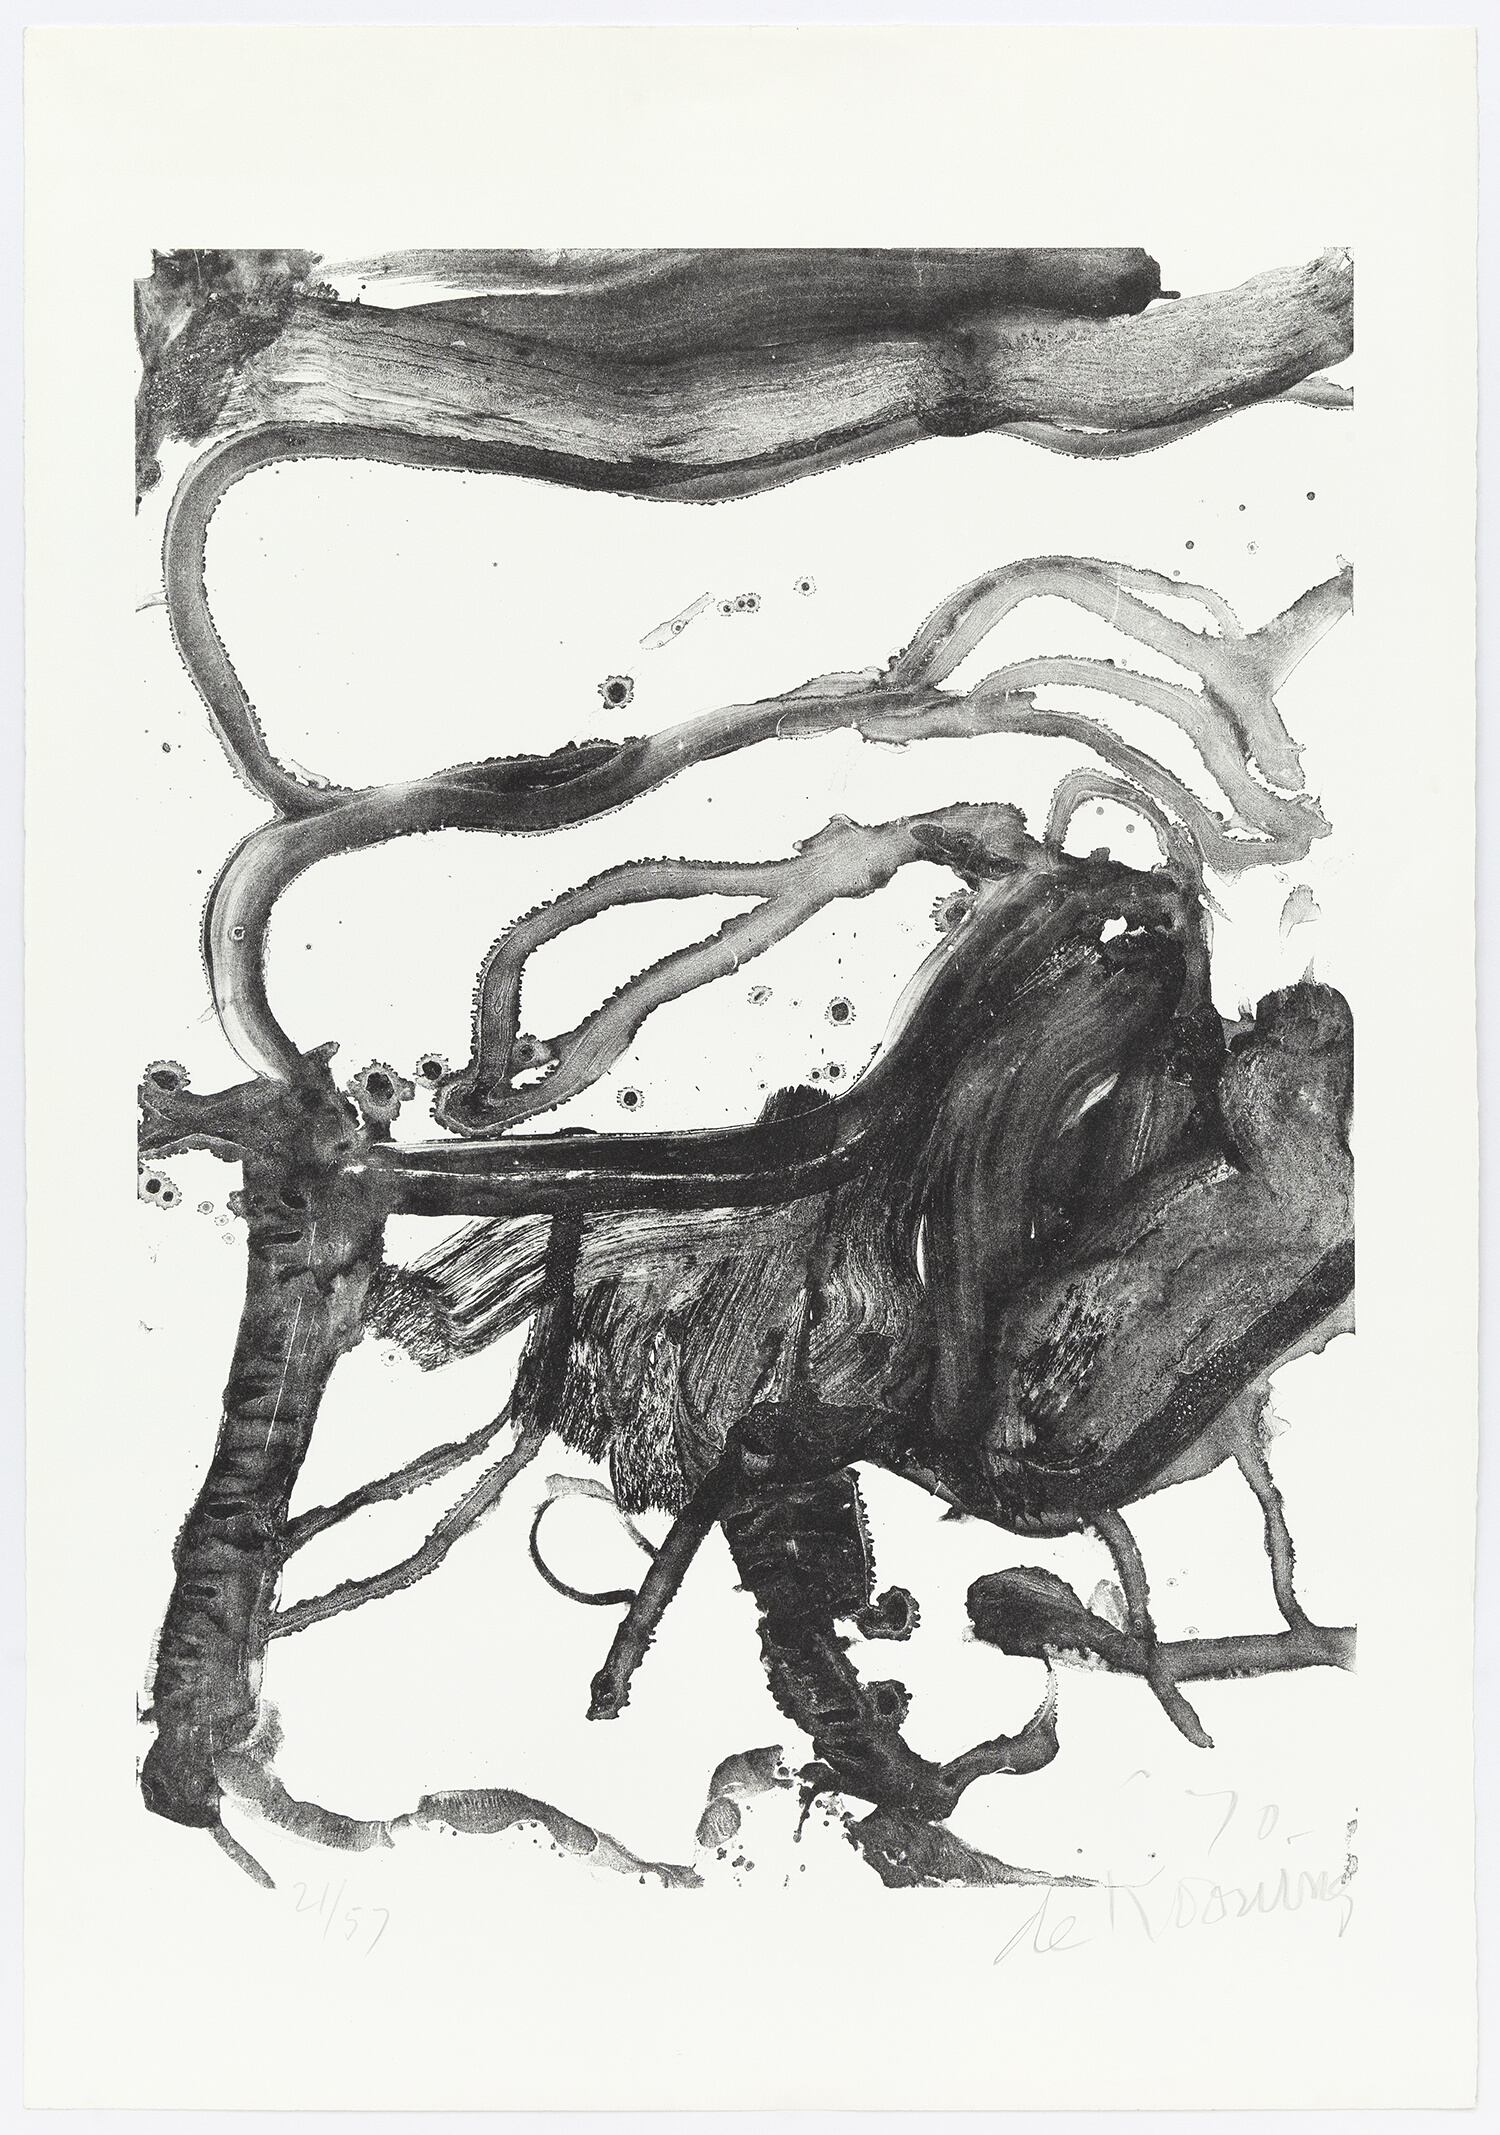 Willem de Kooning High School Desk, 1970 Lithograph 40 x 28 inches (101.6 x 71.1 cm) Edition of 57